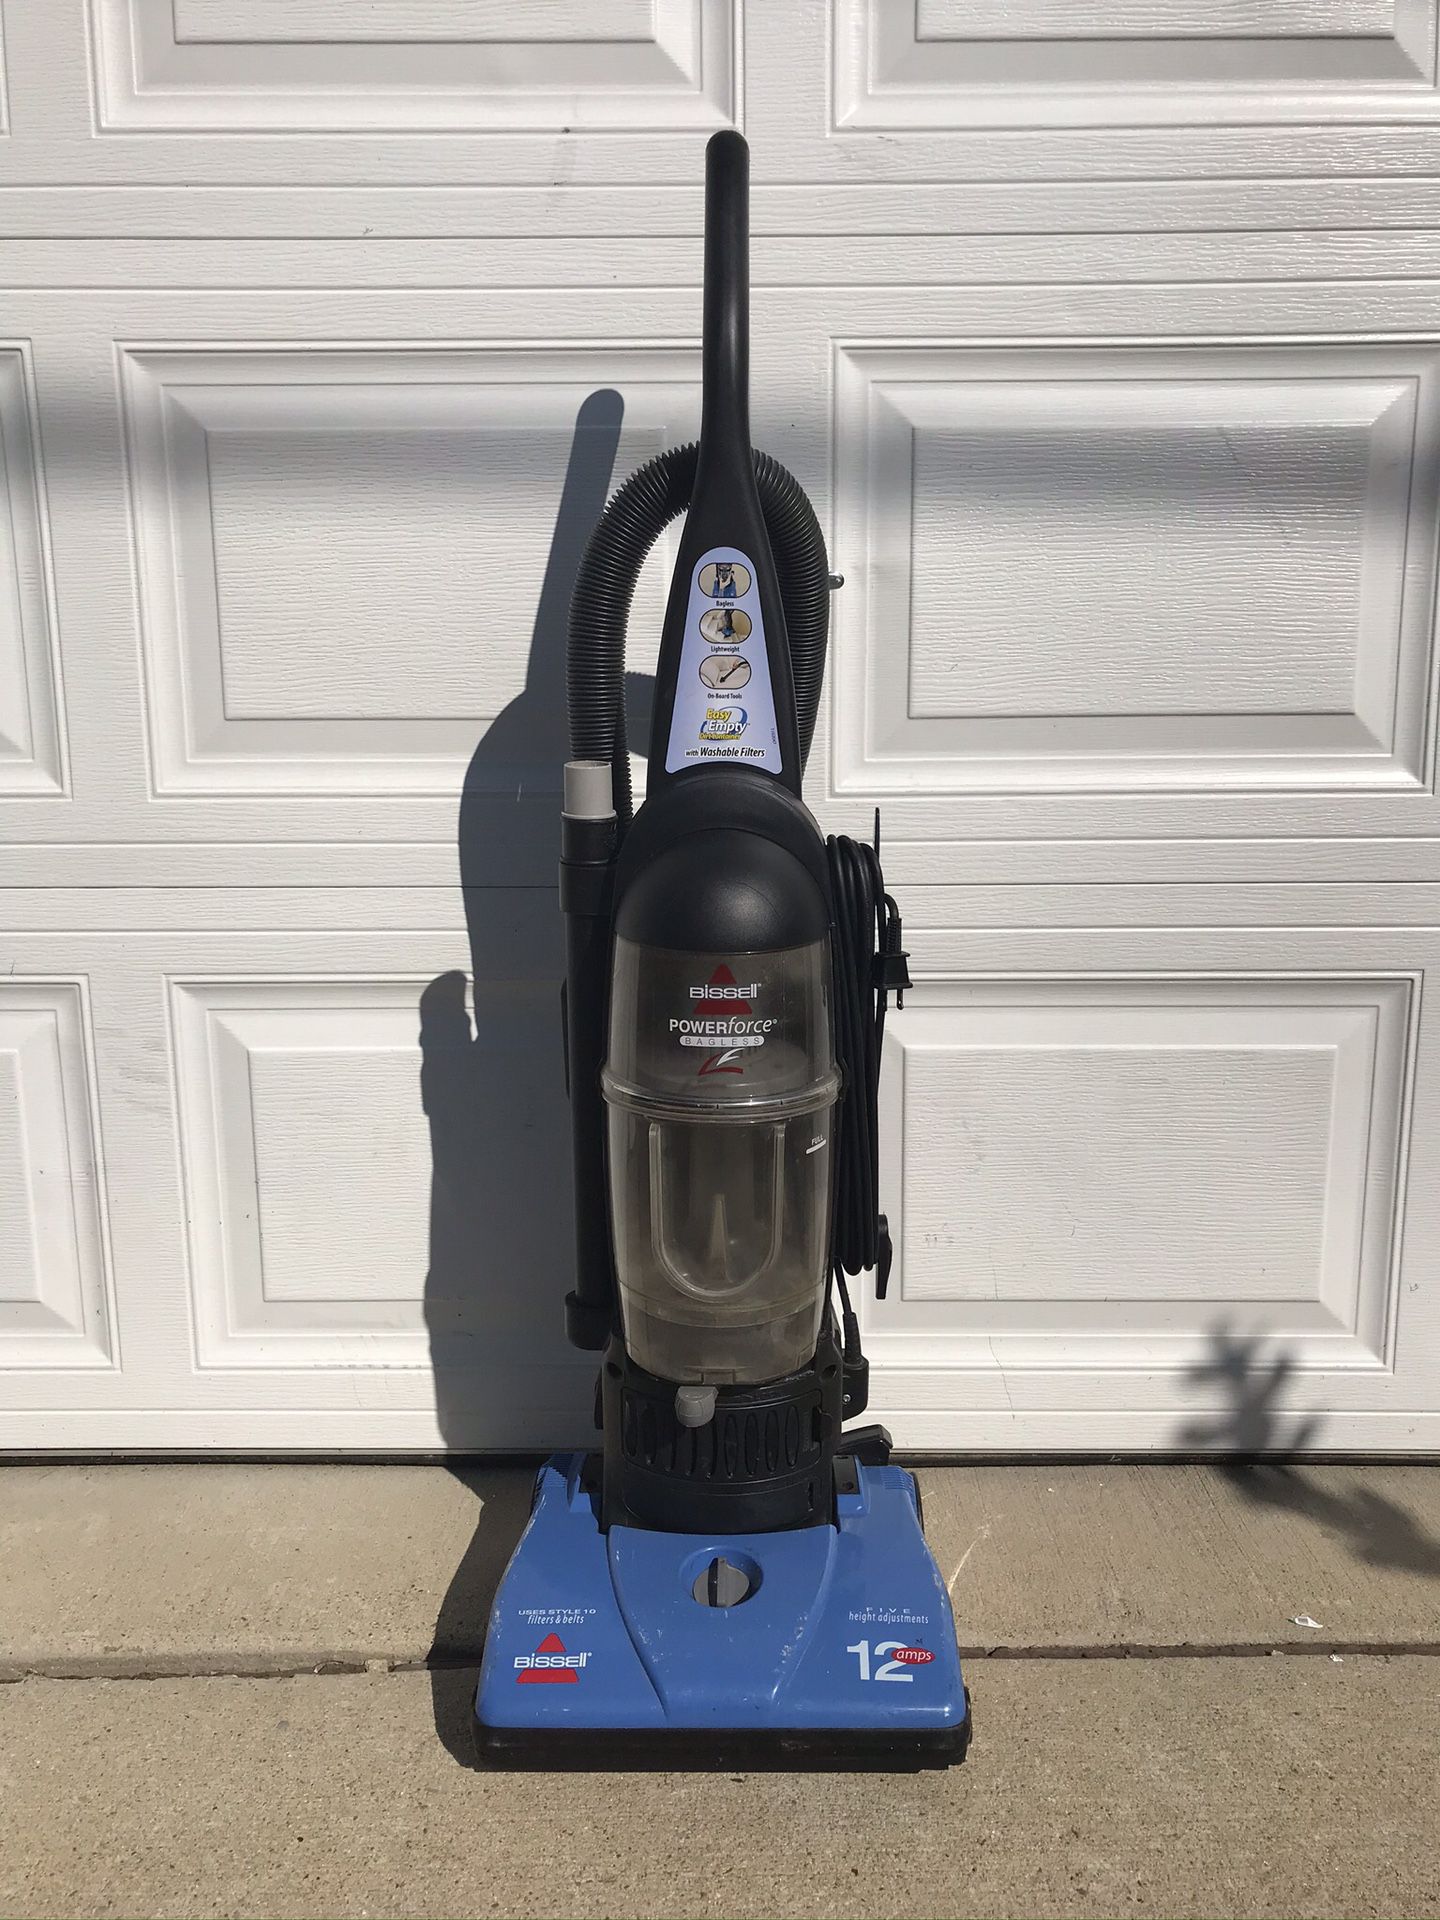 Bagless Bissell Powerforce vacuum clean in excellent working condition, cleaned and ready to go $20